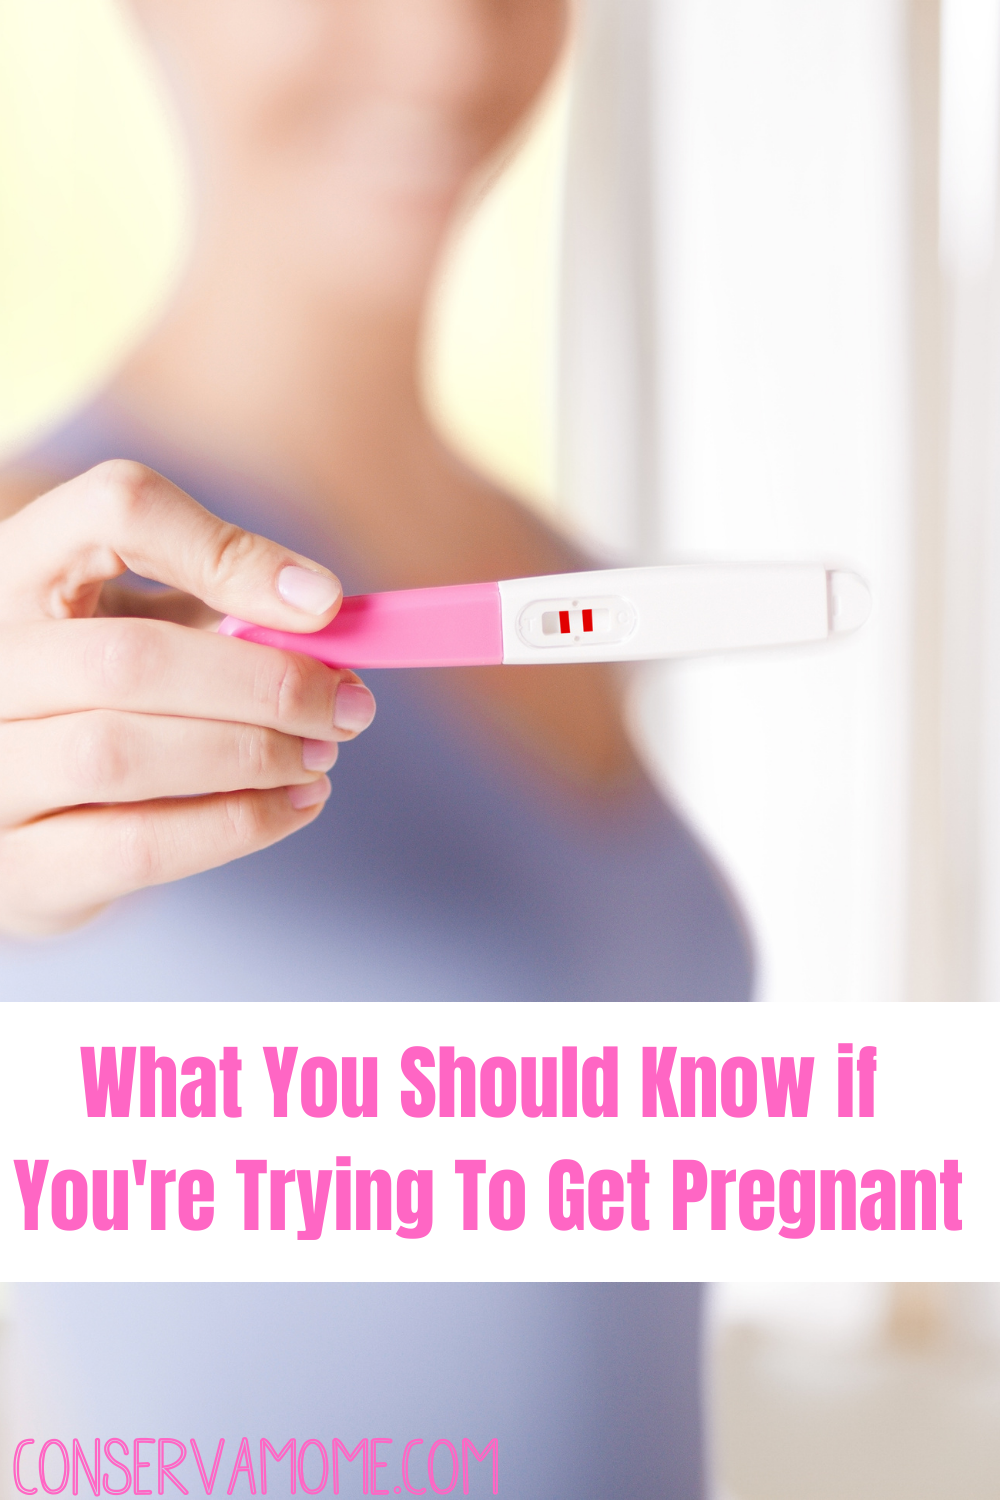 Things to know if you're trying to get pregnant